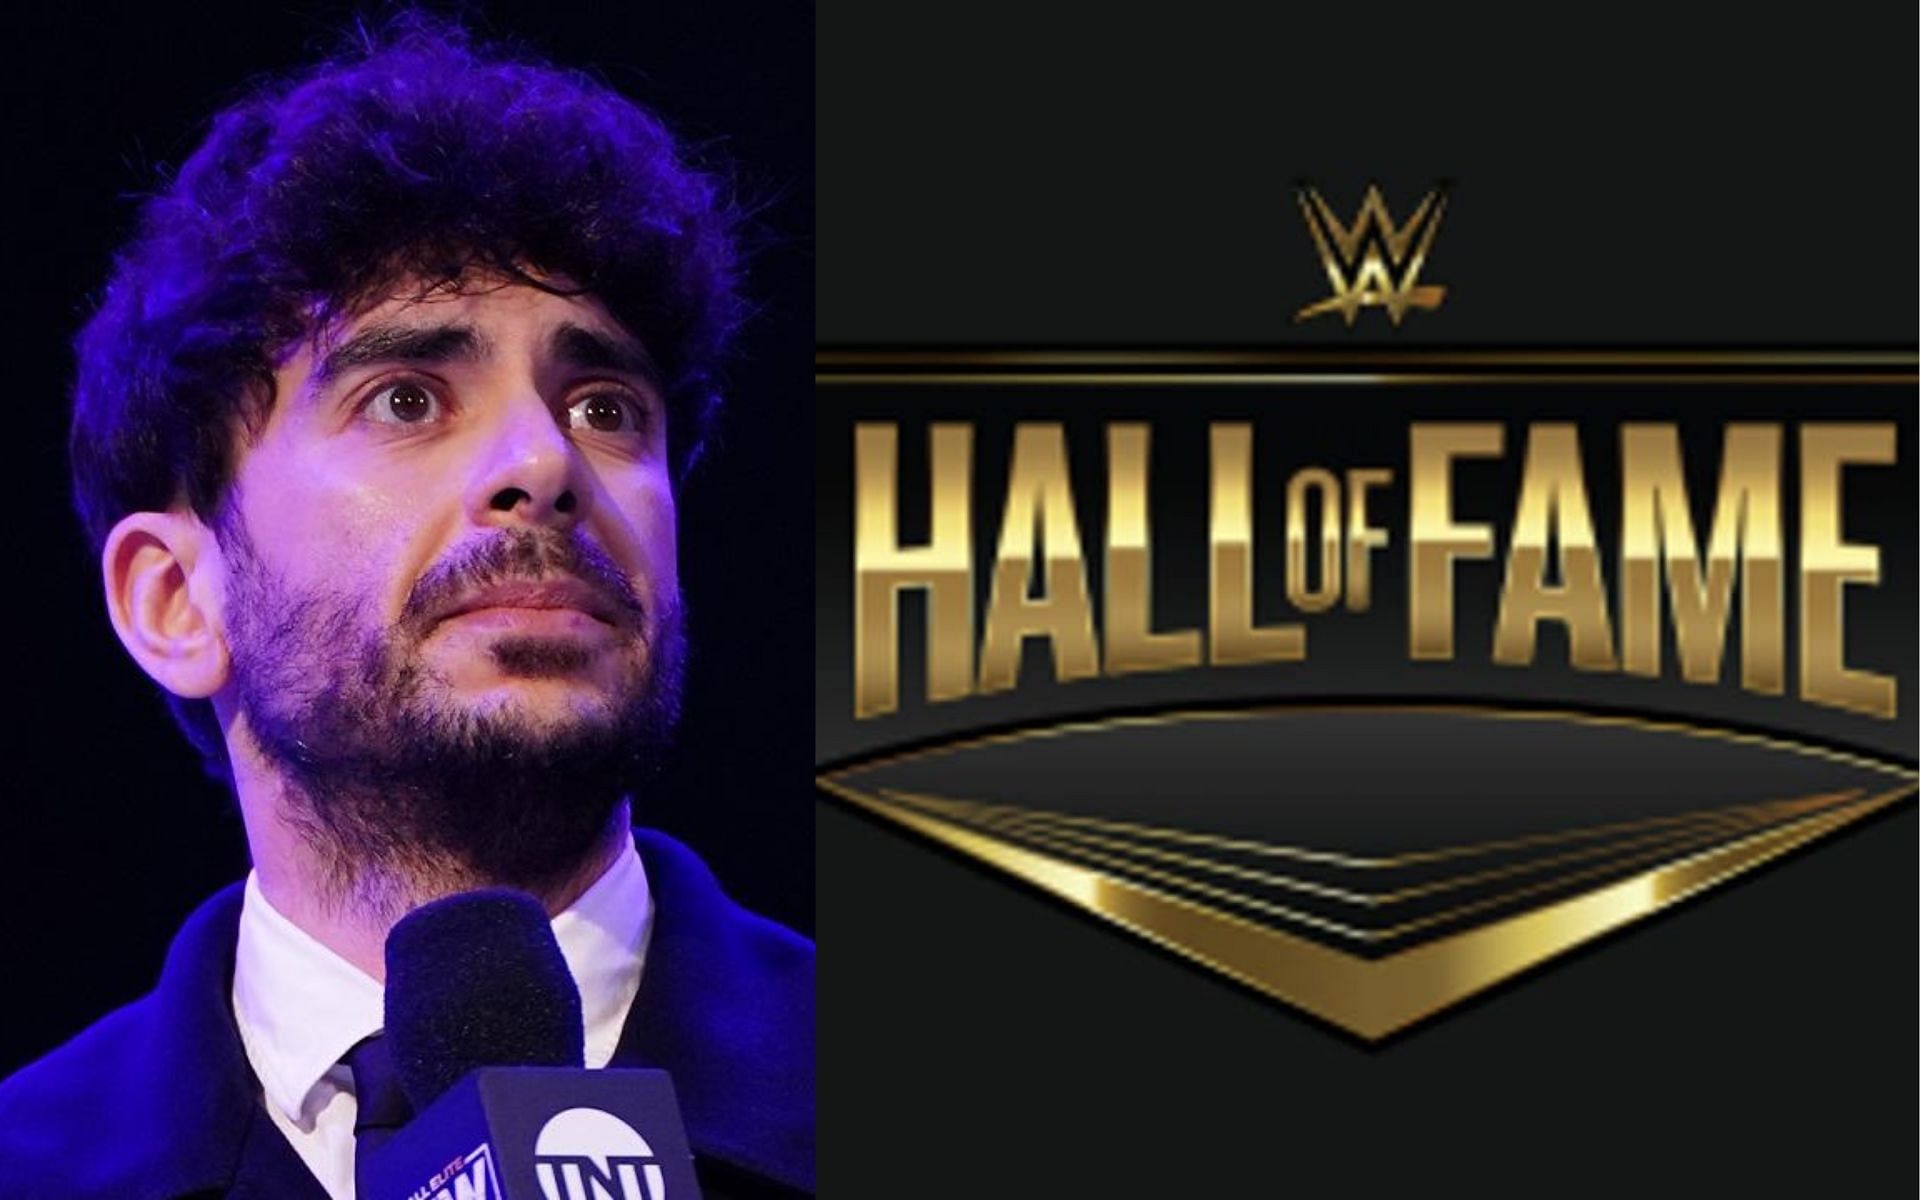 AEW President Tony Khan (left) and WWE Hall of Fame logo (right).